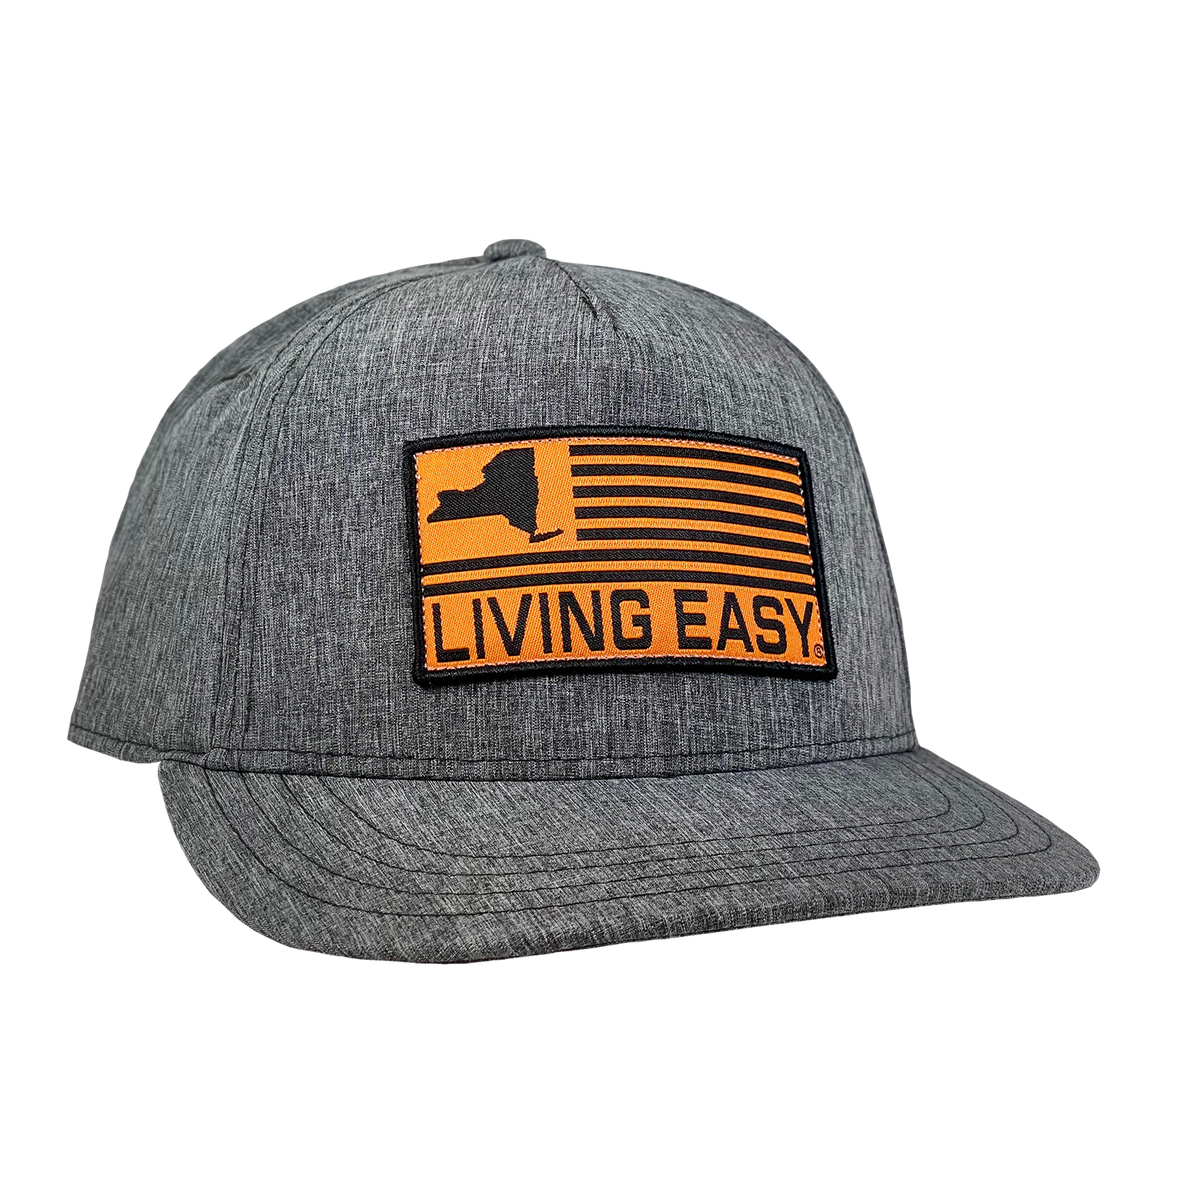 New York Patch Heather Black Hat - Living Easy®